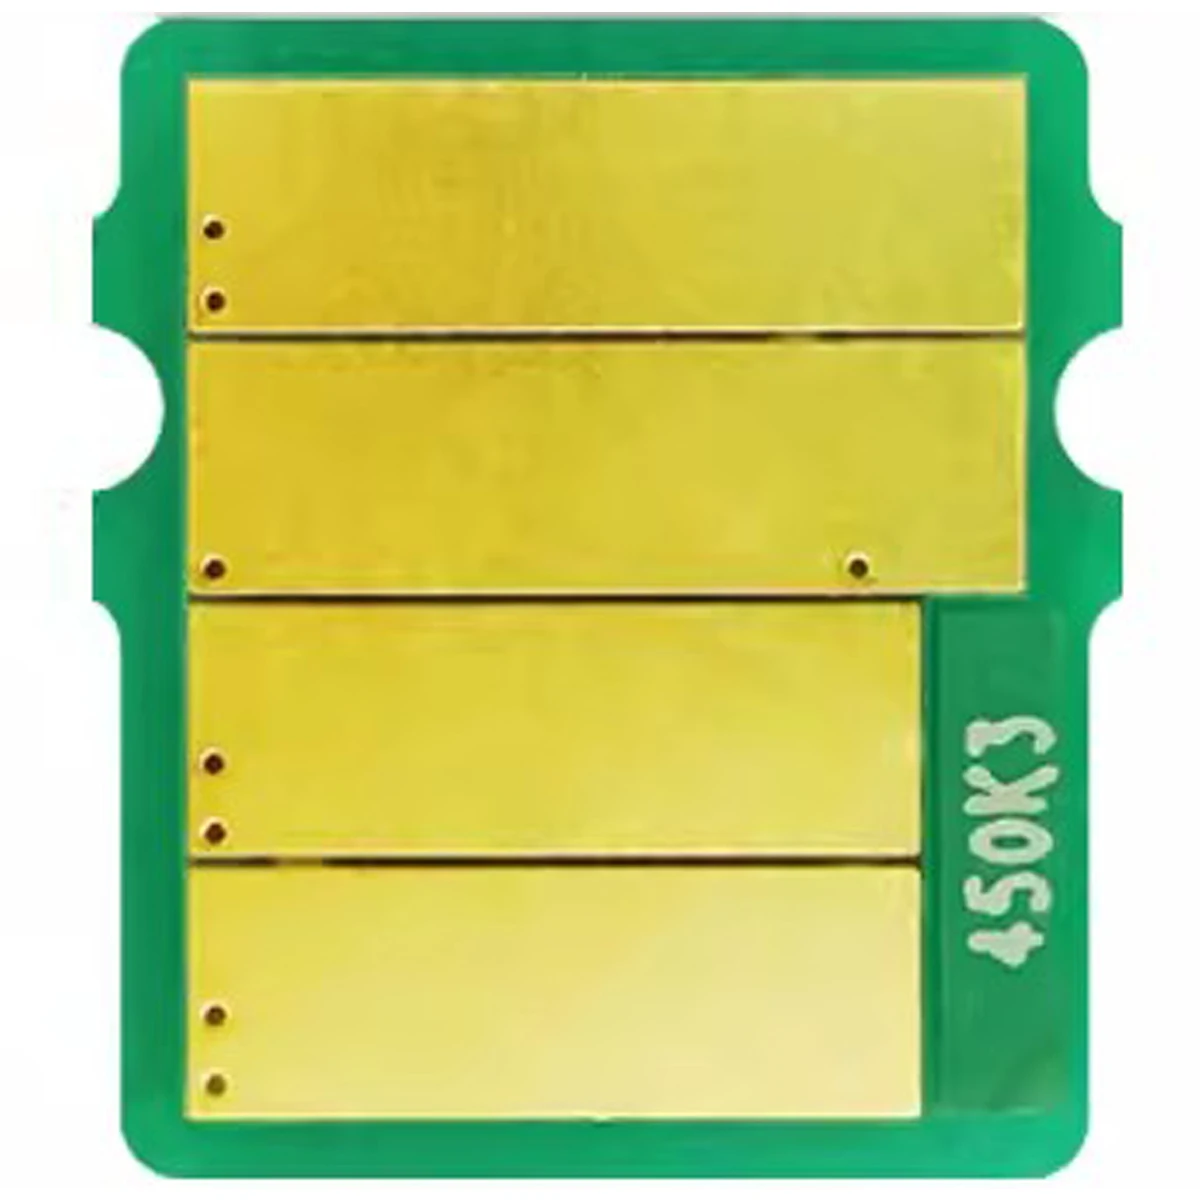 

Toner Cartridge Chip Refill FOR Brother HLL3230 HLL3270 HLL3290 MFCL3710 MFCL3745 MFCL3750 MFCL3770 MFCL3730 CW CDW CDN MFP